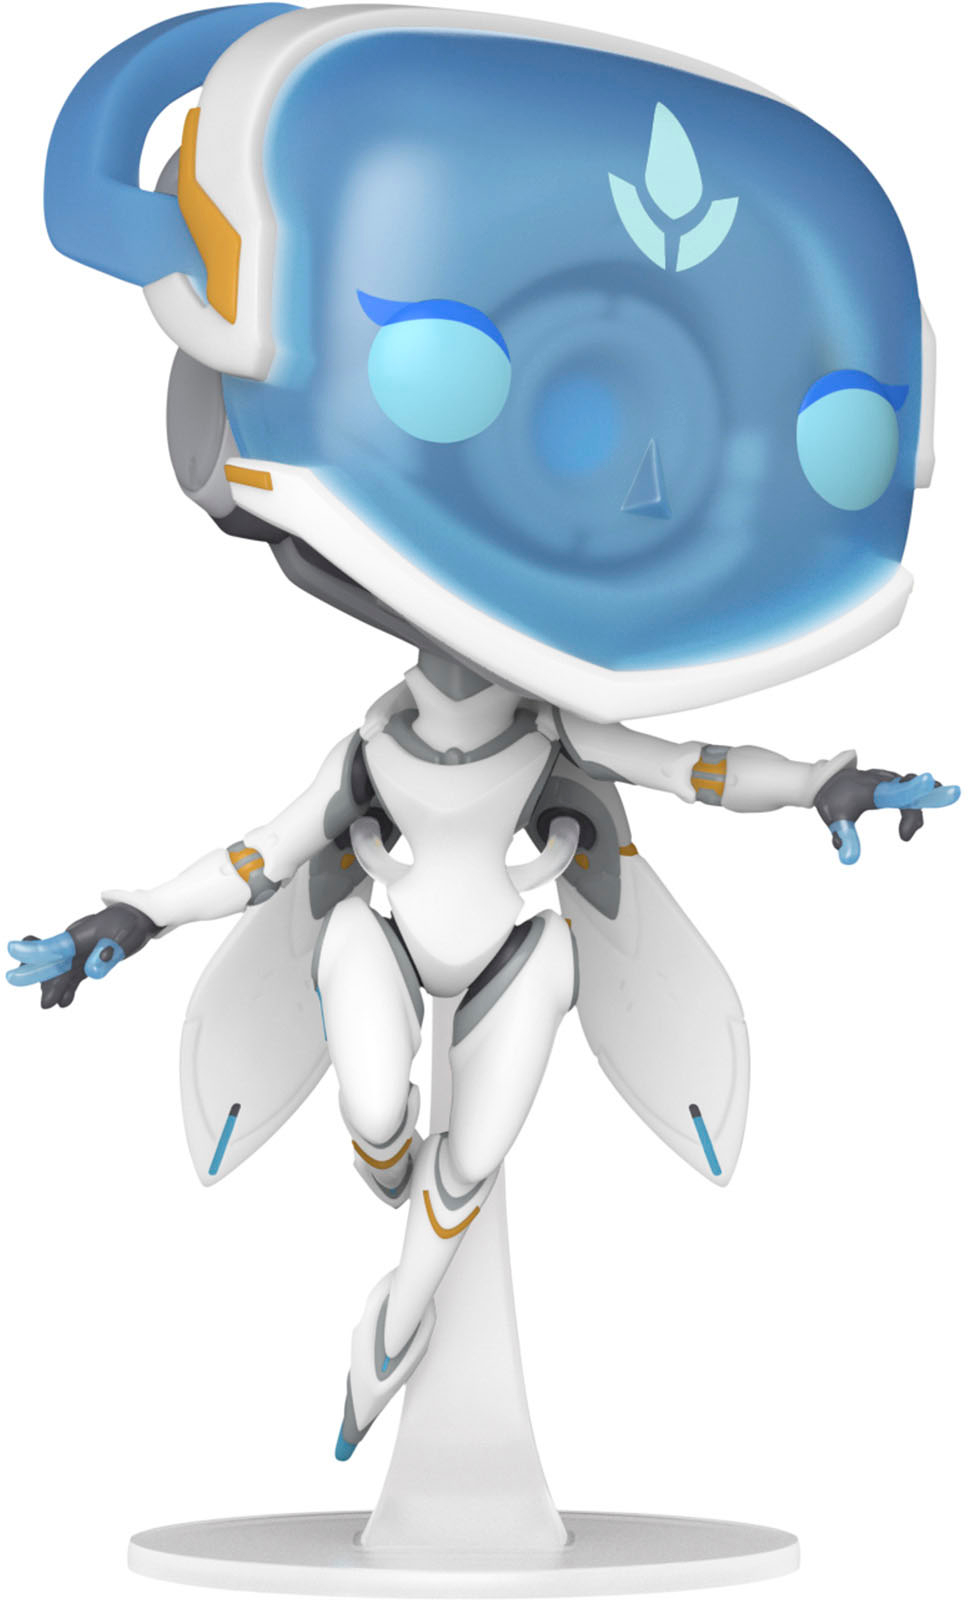 Funko Action Overwatch 2 - Tracer